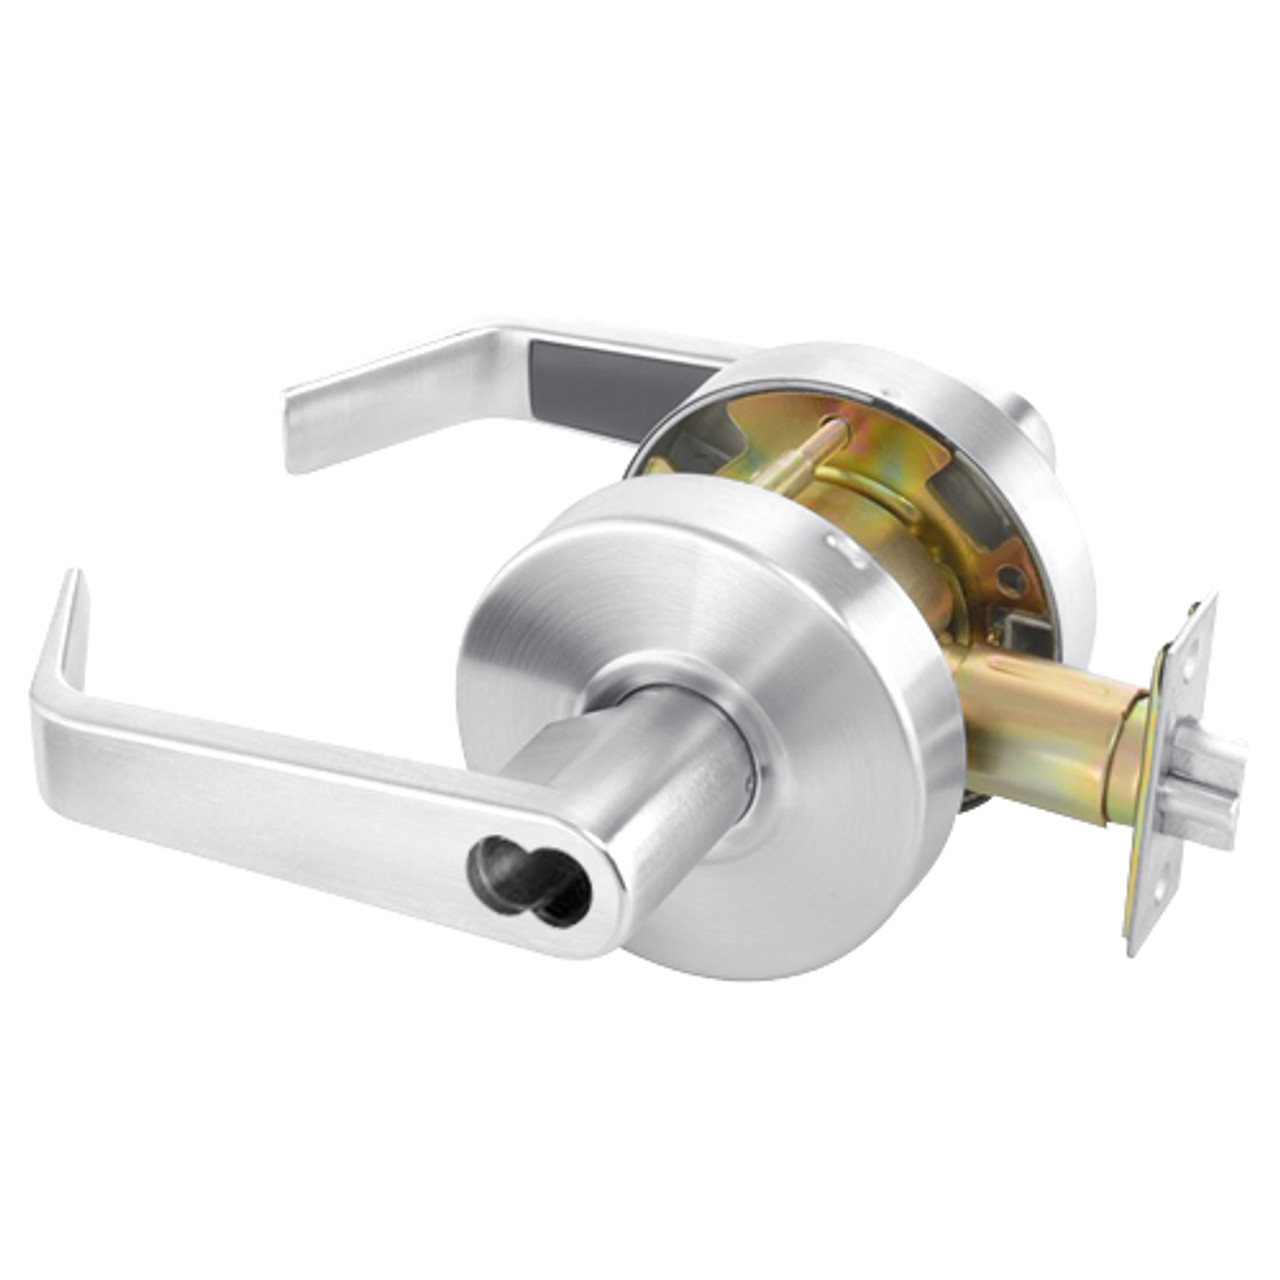 B-AU4607LN-625 Yale 4600LN Series Single Cylinder Entry Cylindrical Lock with Augusta Lever Prepped for SFIC in Bright Chrome